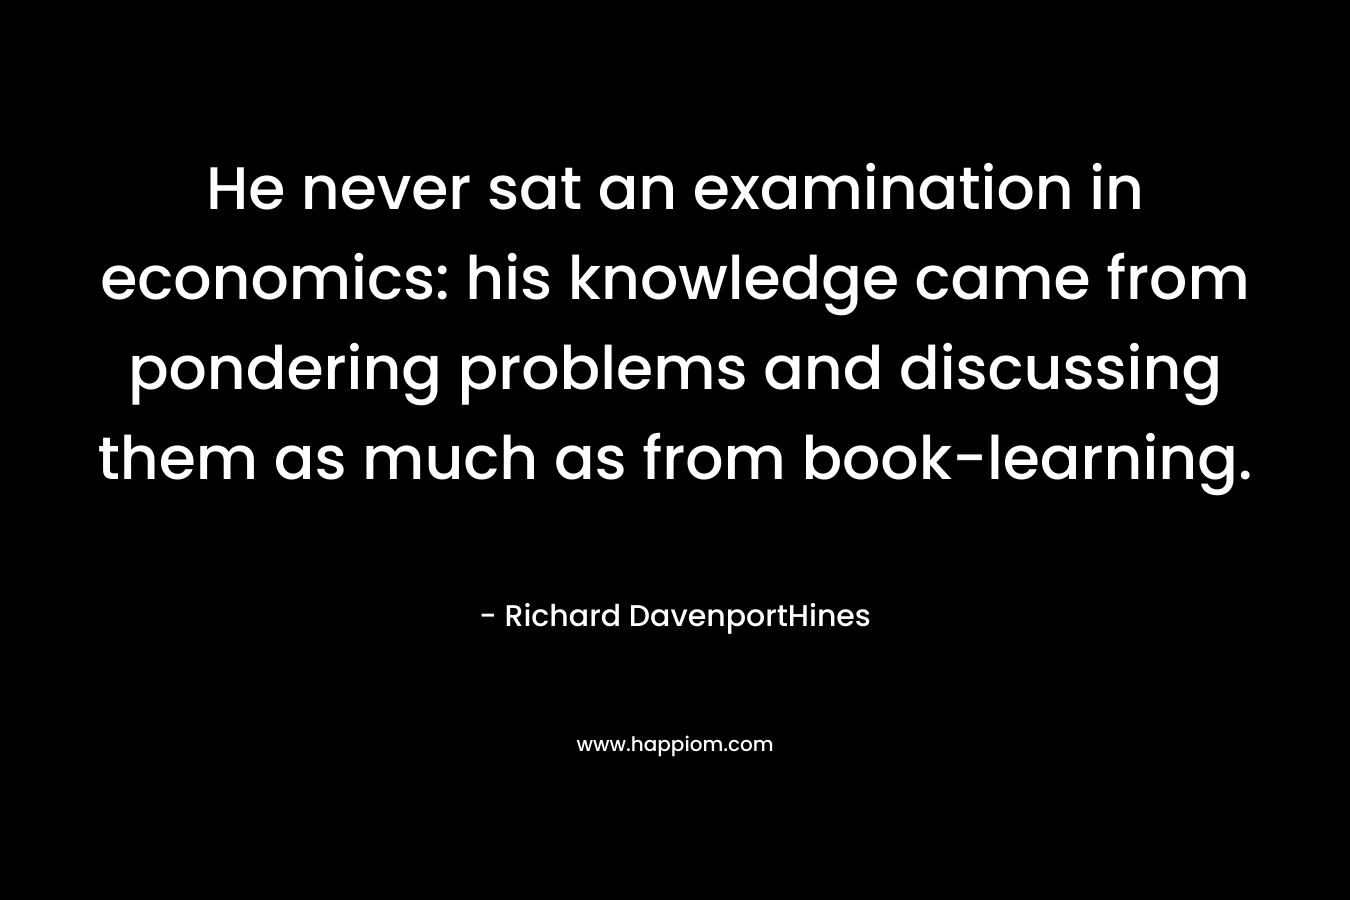 He never sat an examination in economics: his knowledge came from pondering problems and discussing them as much as from book-learning. – Richard DavenportHines